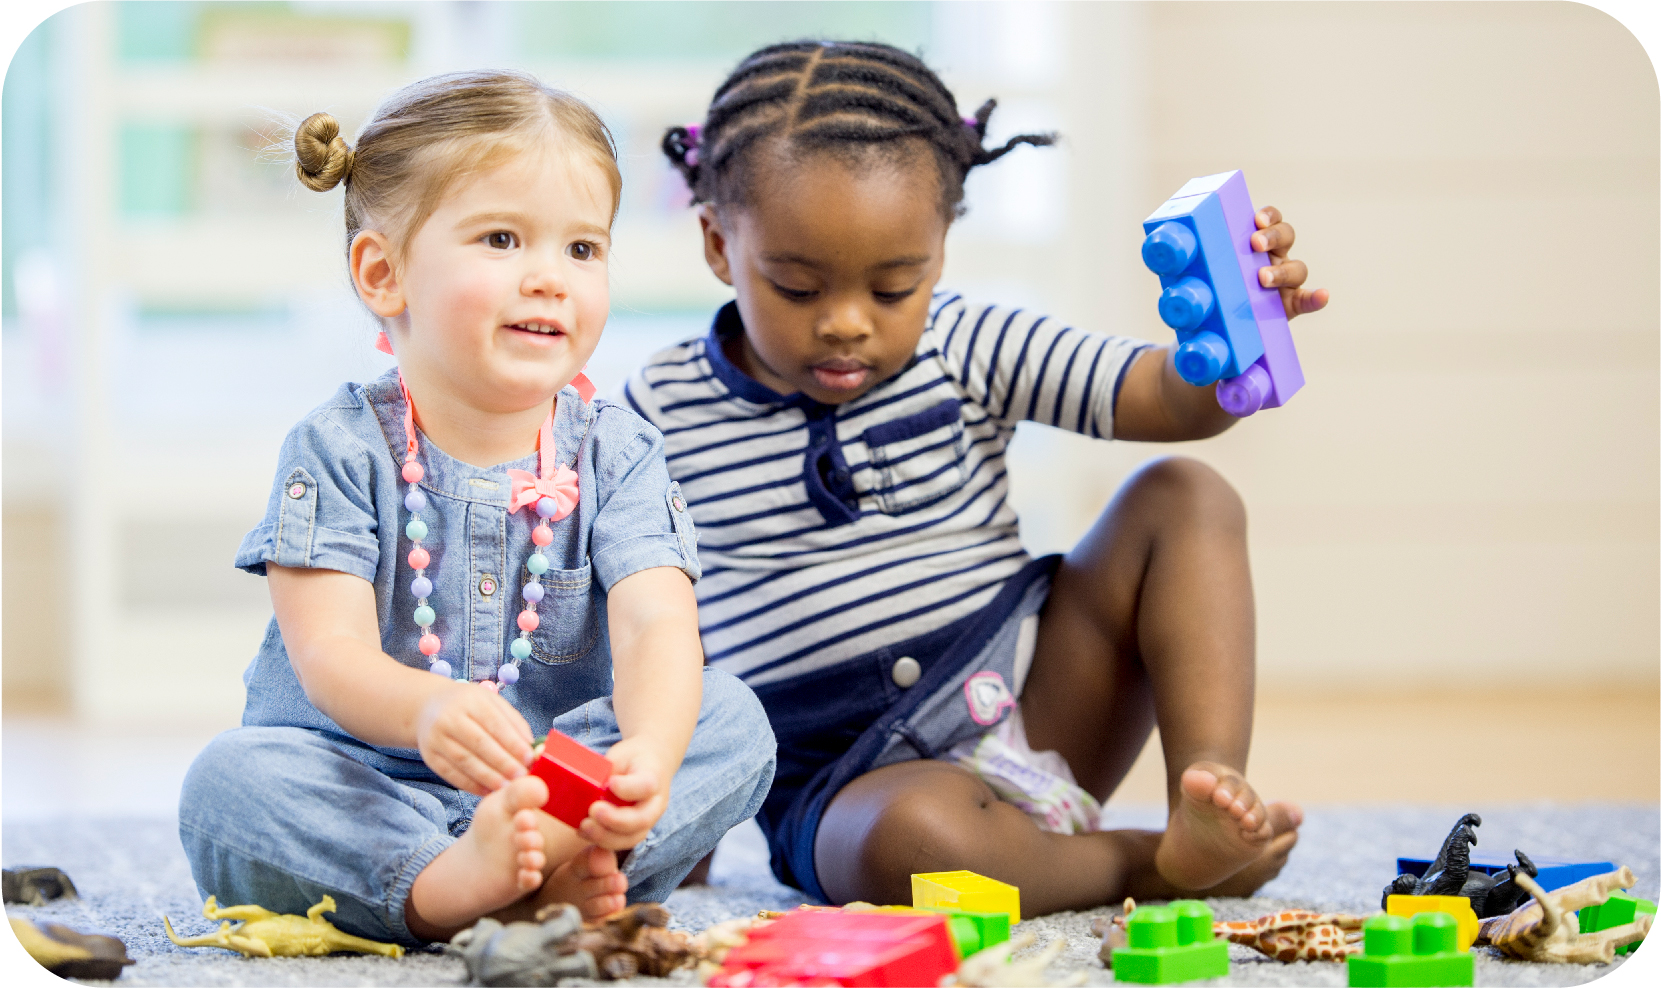 Children playing at home-based child care